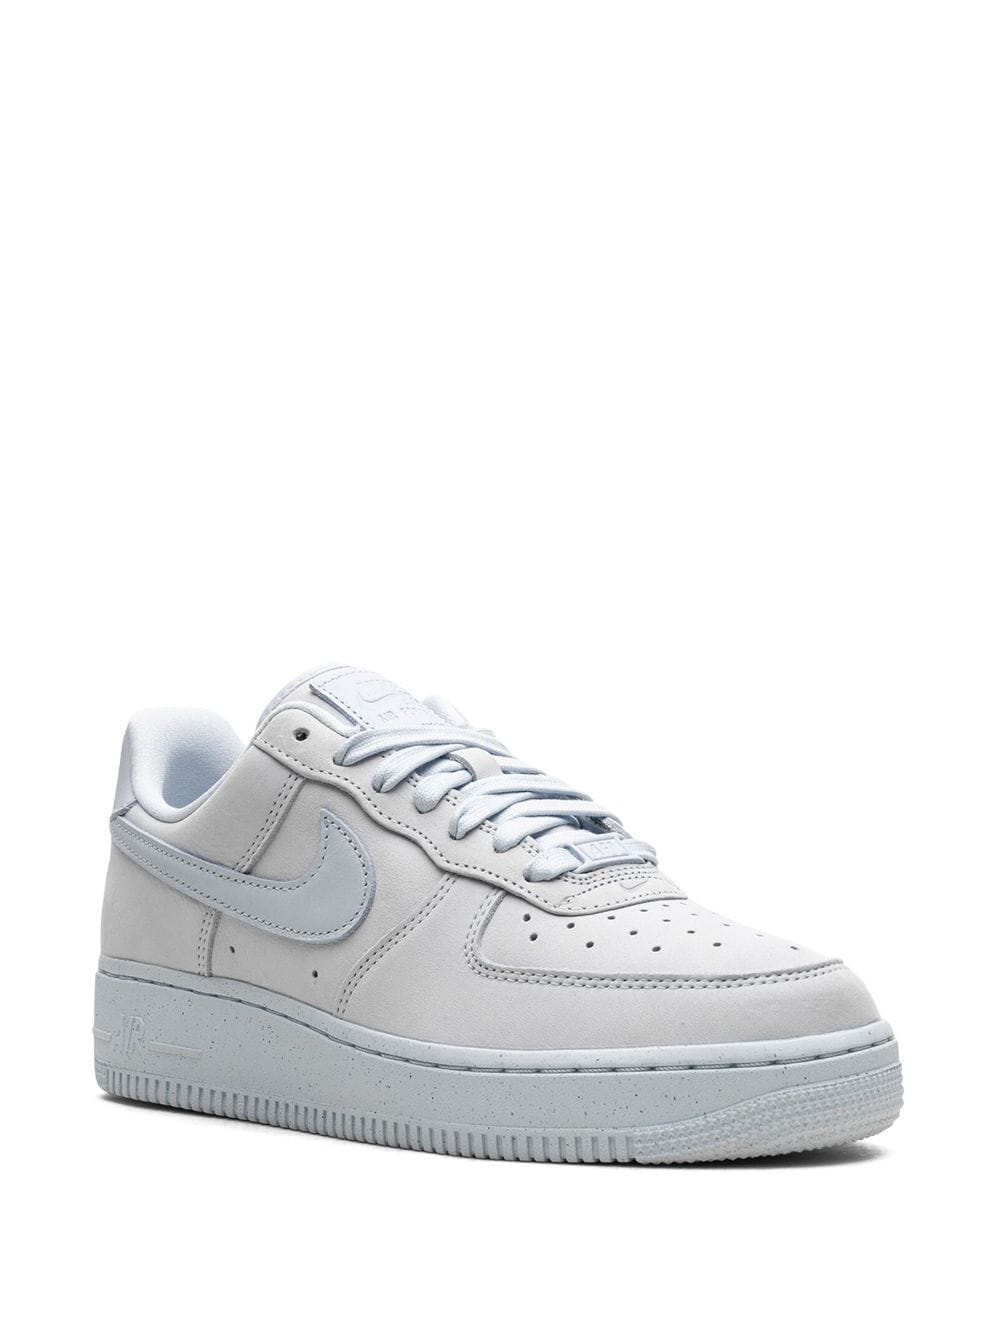 Nike Air Force 1 Low '07 "Blue Tint" sneakers